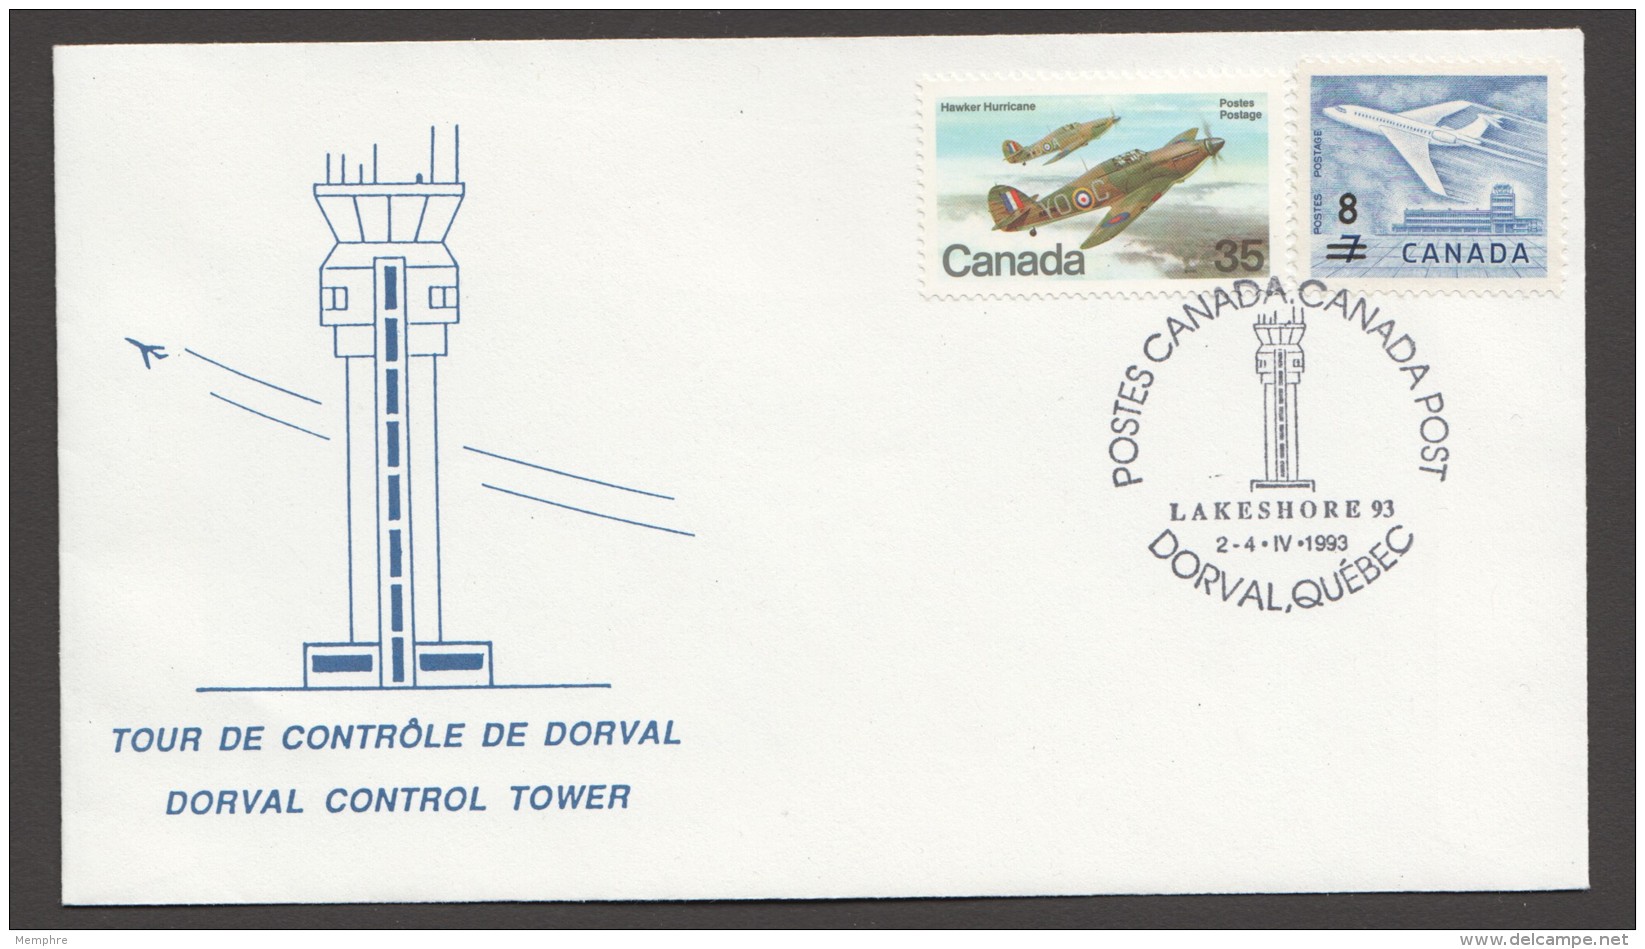 1993  Lakeshore 93 Commemorative Cover Temporary Cancel Showing Dorval Airport Control Tower - Covers & Documents